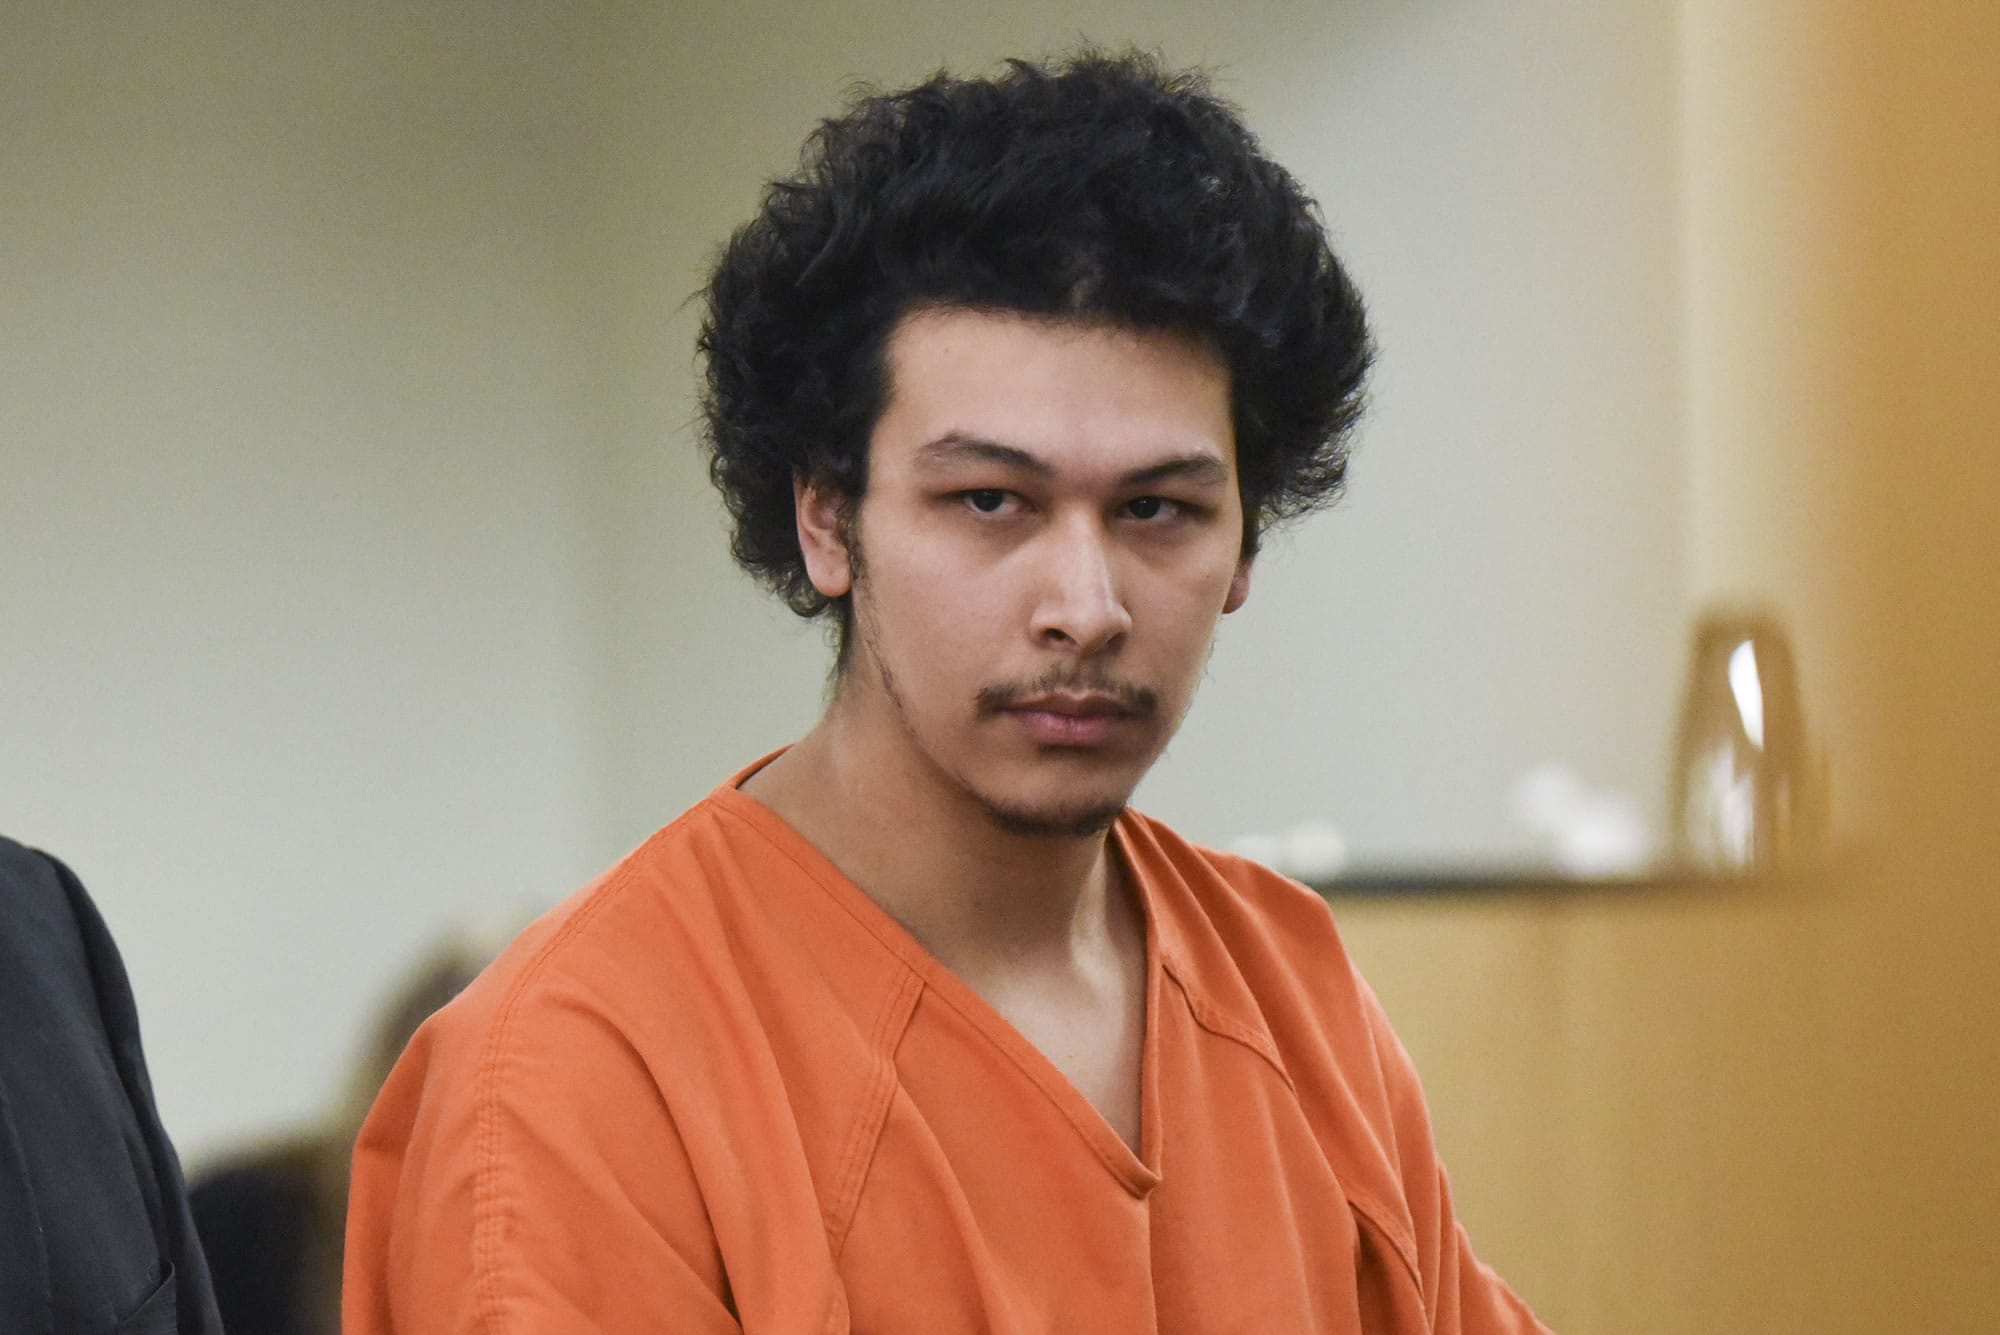 Ernesto Estrada-Tapia, 24, makes a first appearance in Clark County Superior Court in February on a warrant charging him with vehicular homicide and hit-and-run driving causing injury or death in connection with the death of Christian Walton. Estrada-Tapia was sentenced to five years in prison Friday.